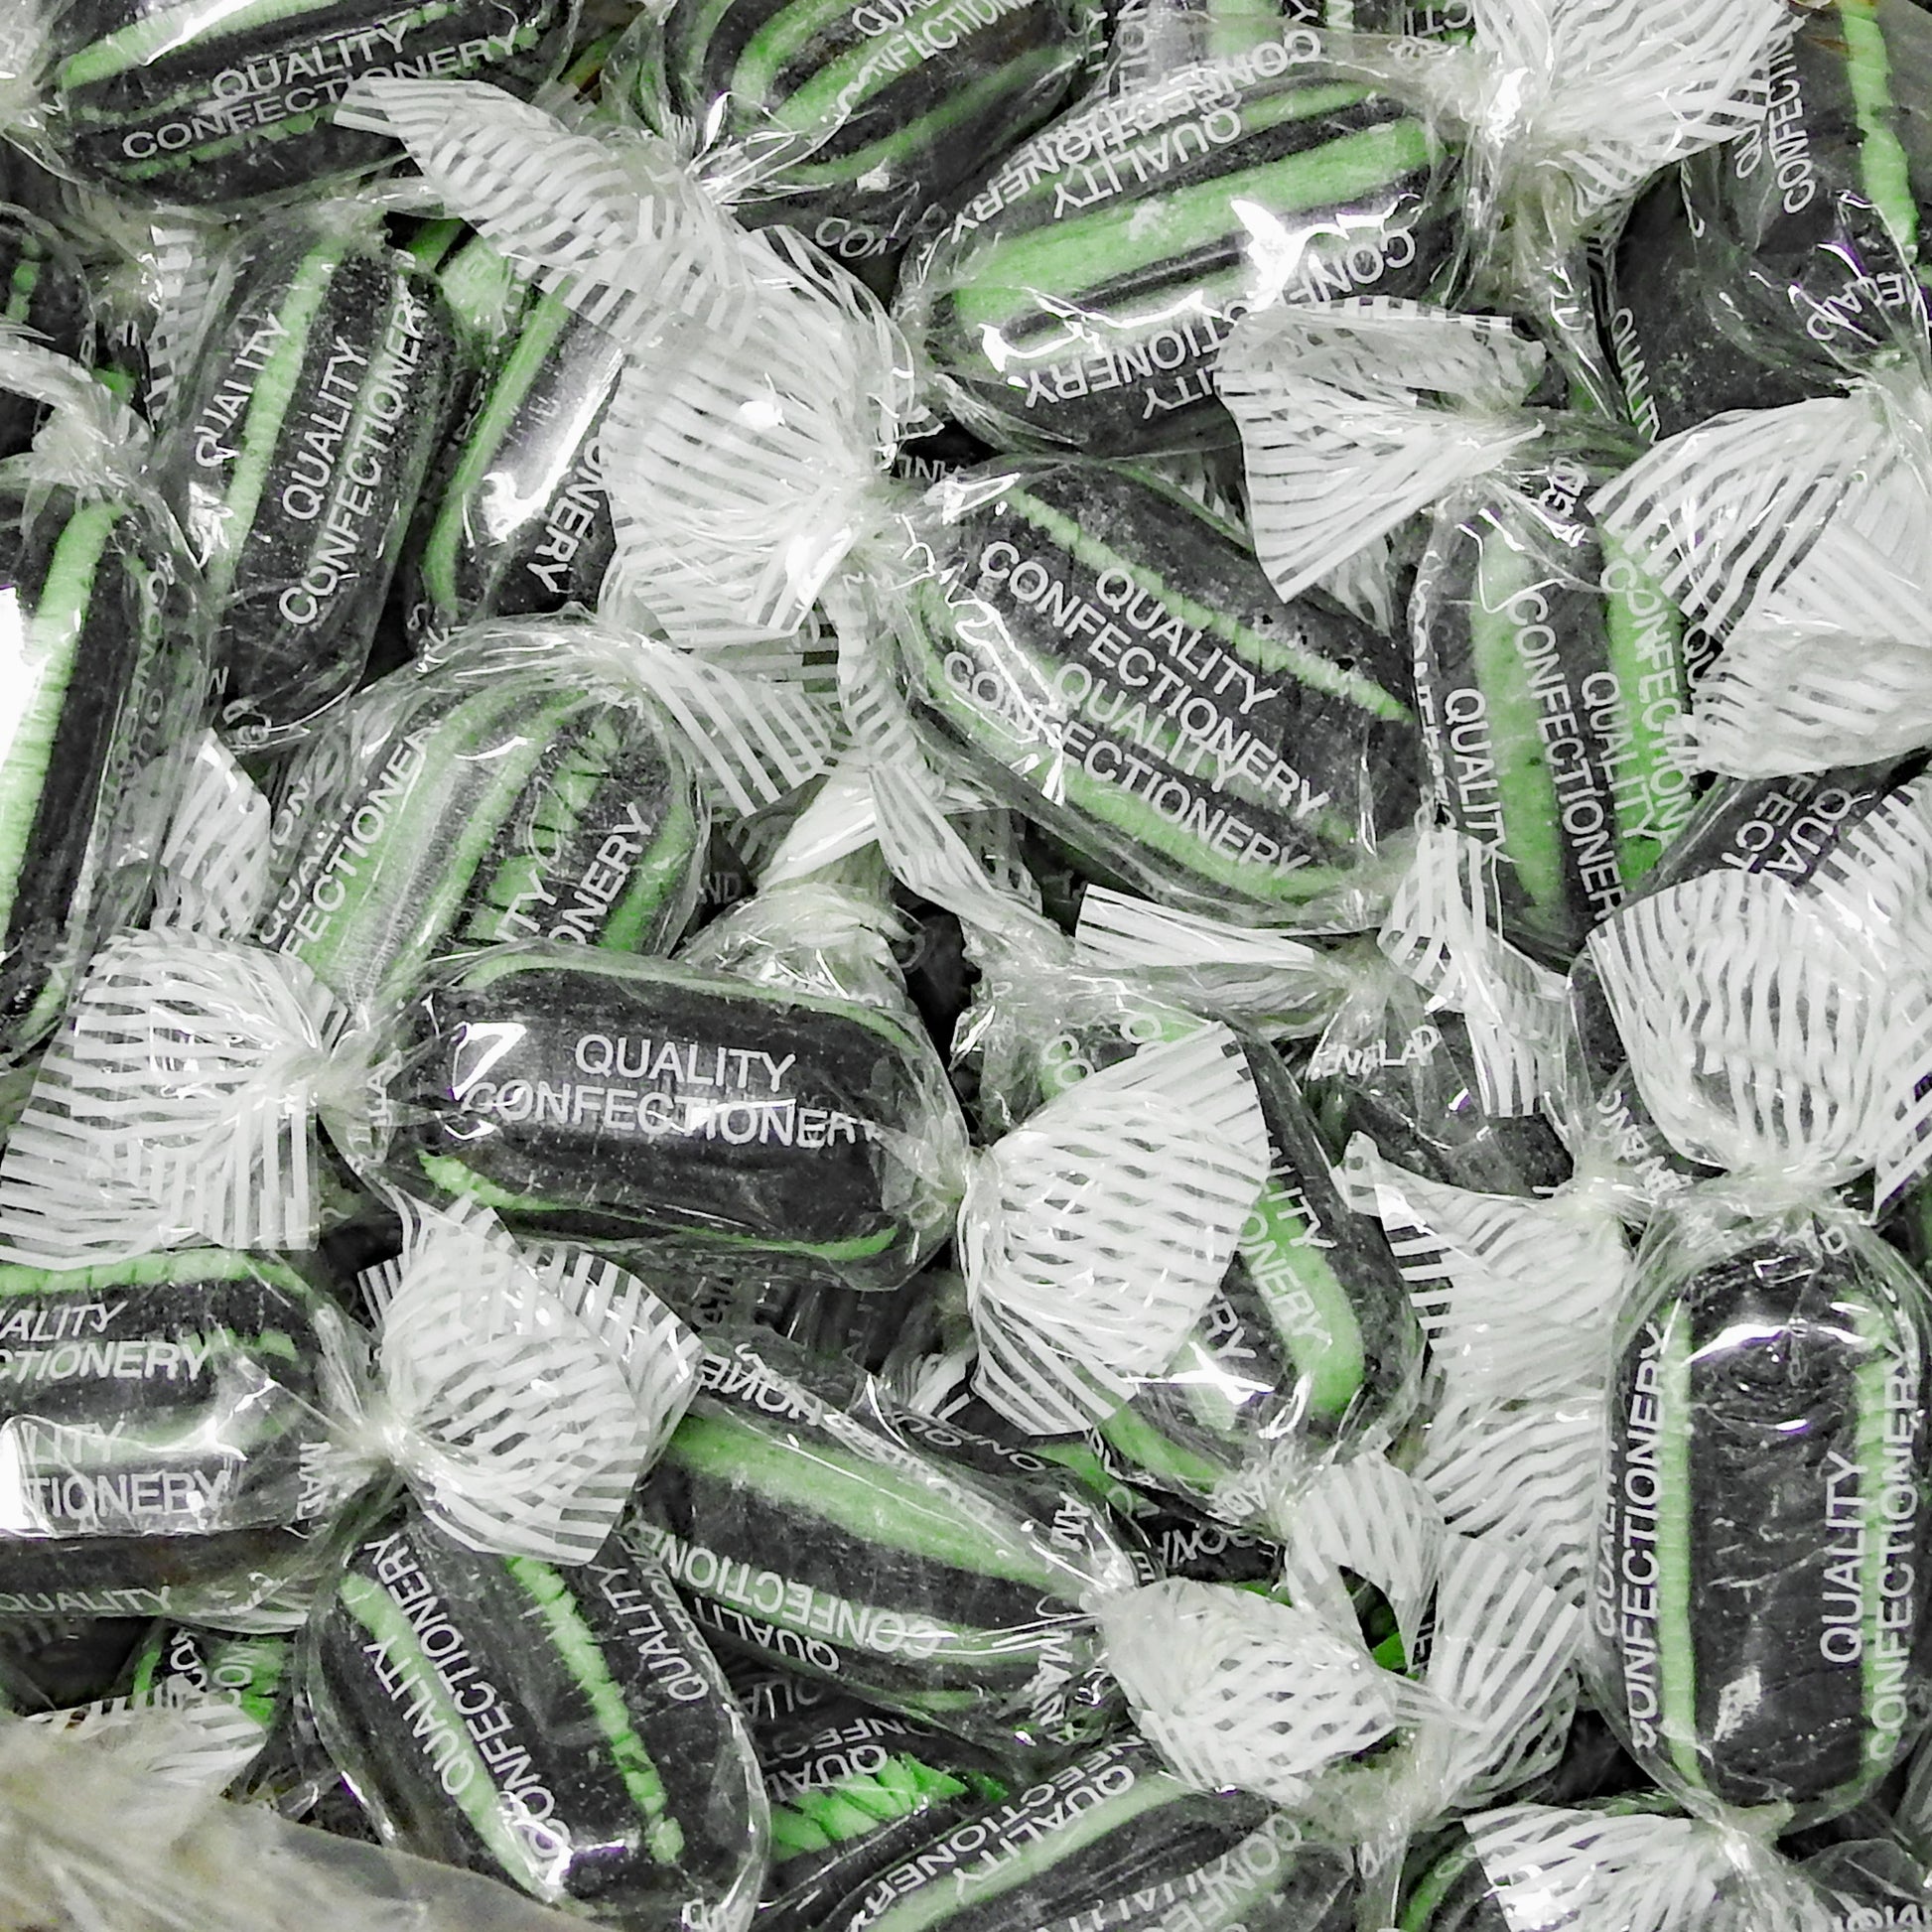 Lime & Liquorice Hard Boiled Sweets at The Sweetie Jar